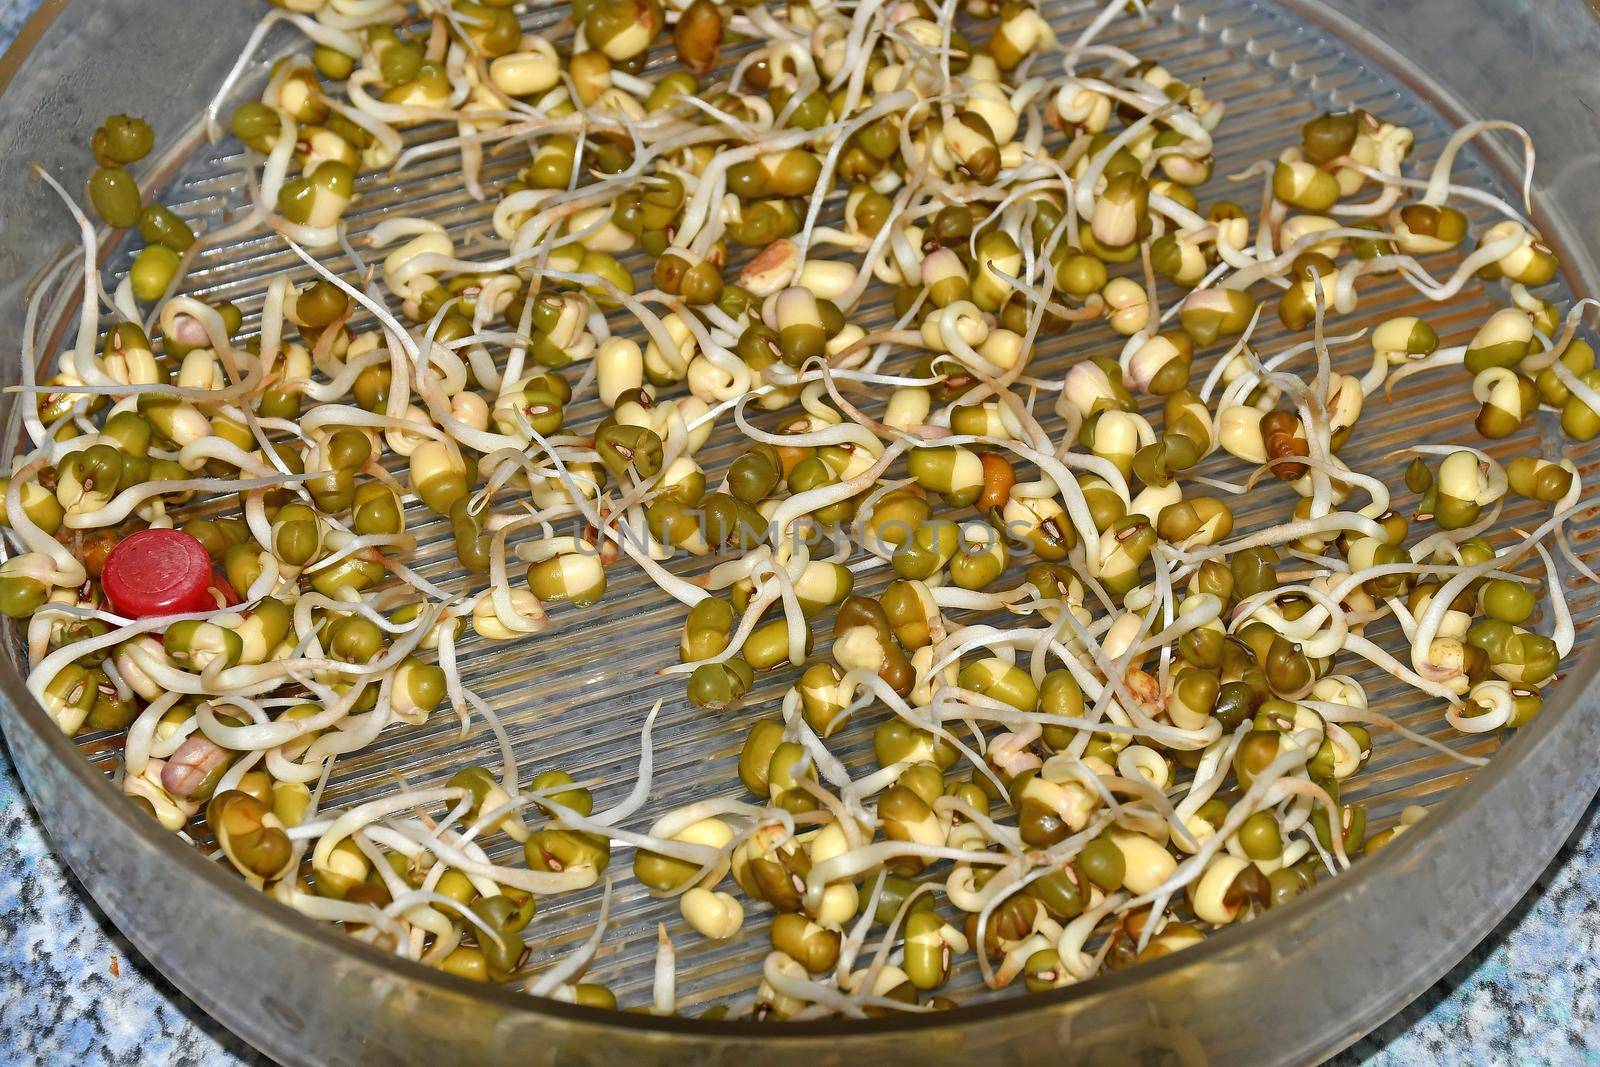 mung bean sprouts in a closeup by Jochen